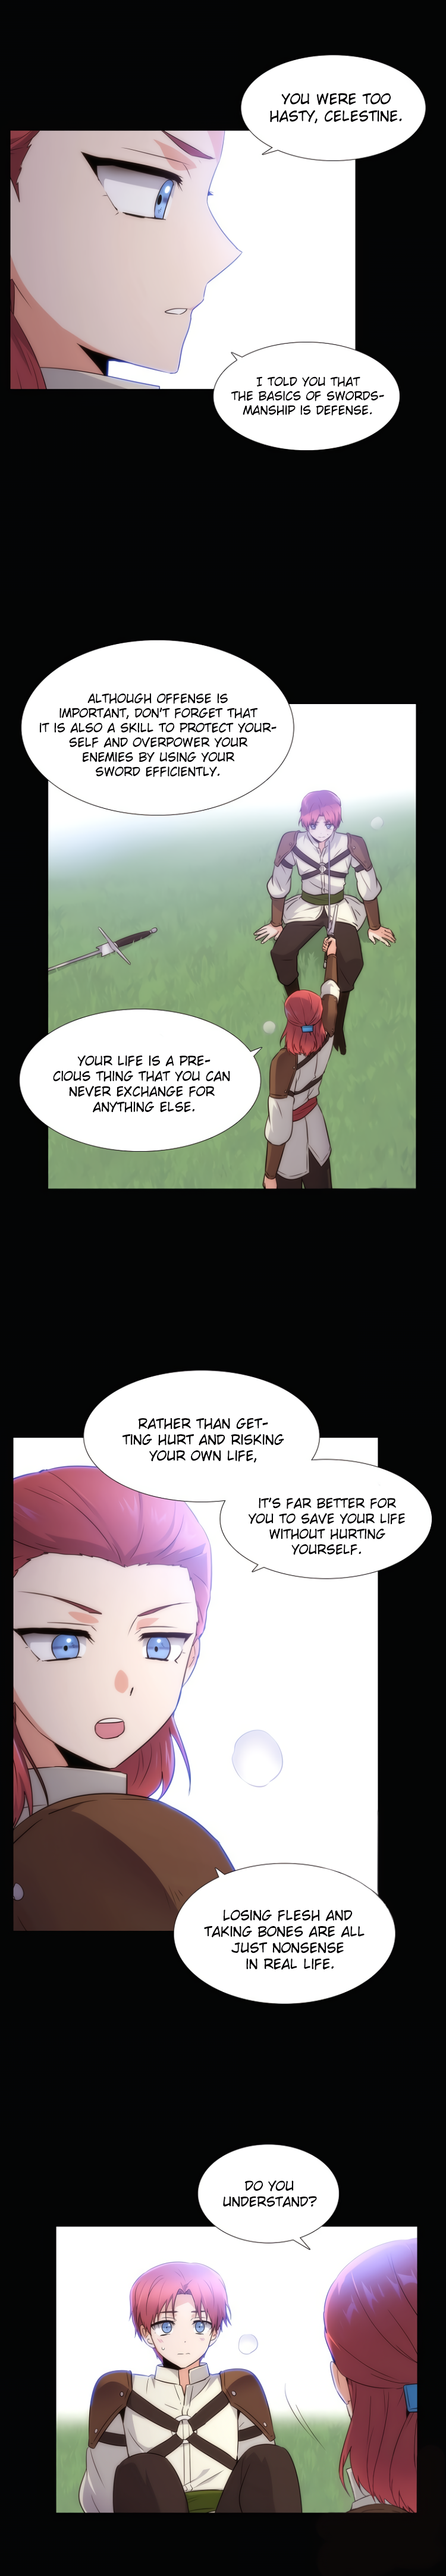 The Villain Discovered My Identity - Page 2